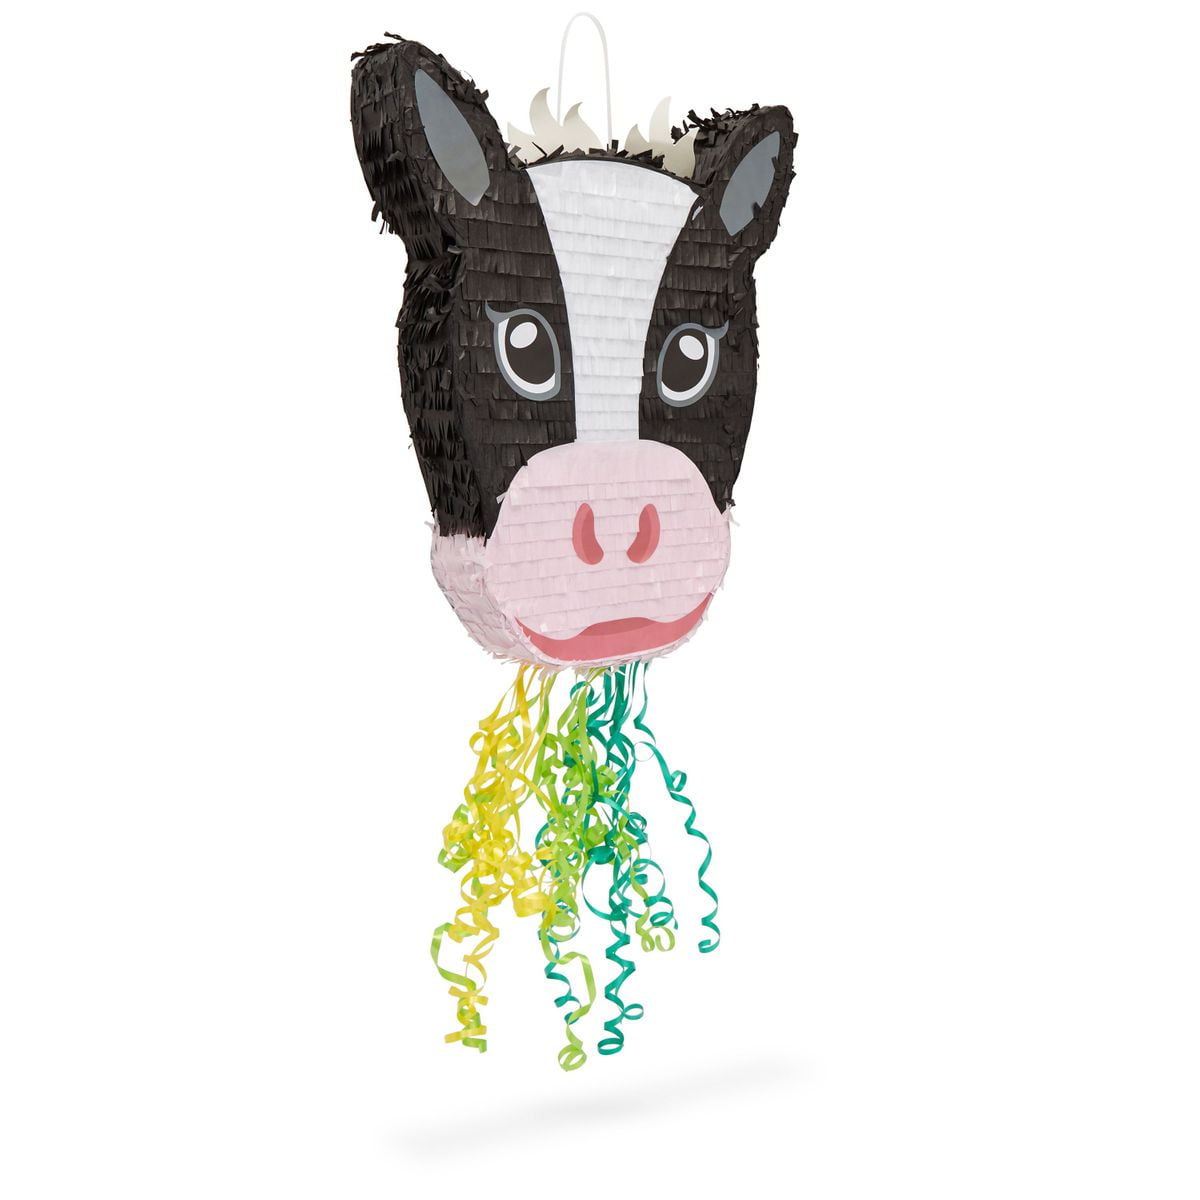 17 x 12.75 in Barnyard Pinata for Farmhouse or Country Party